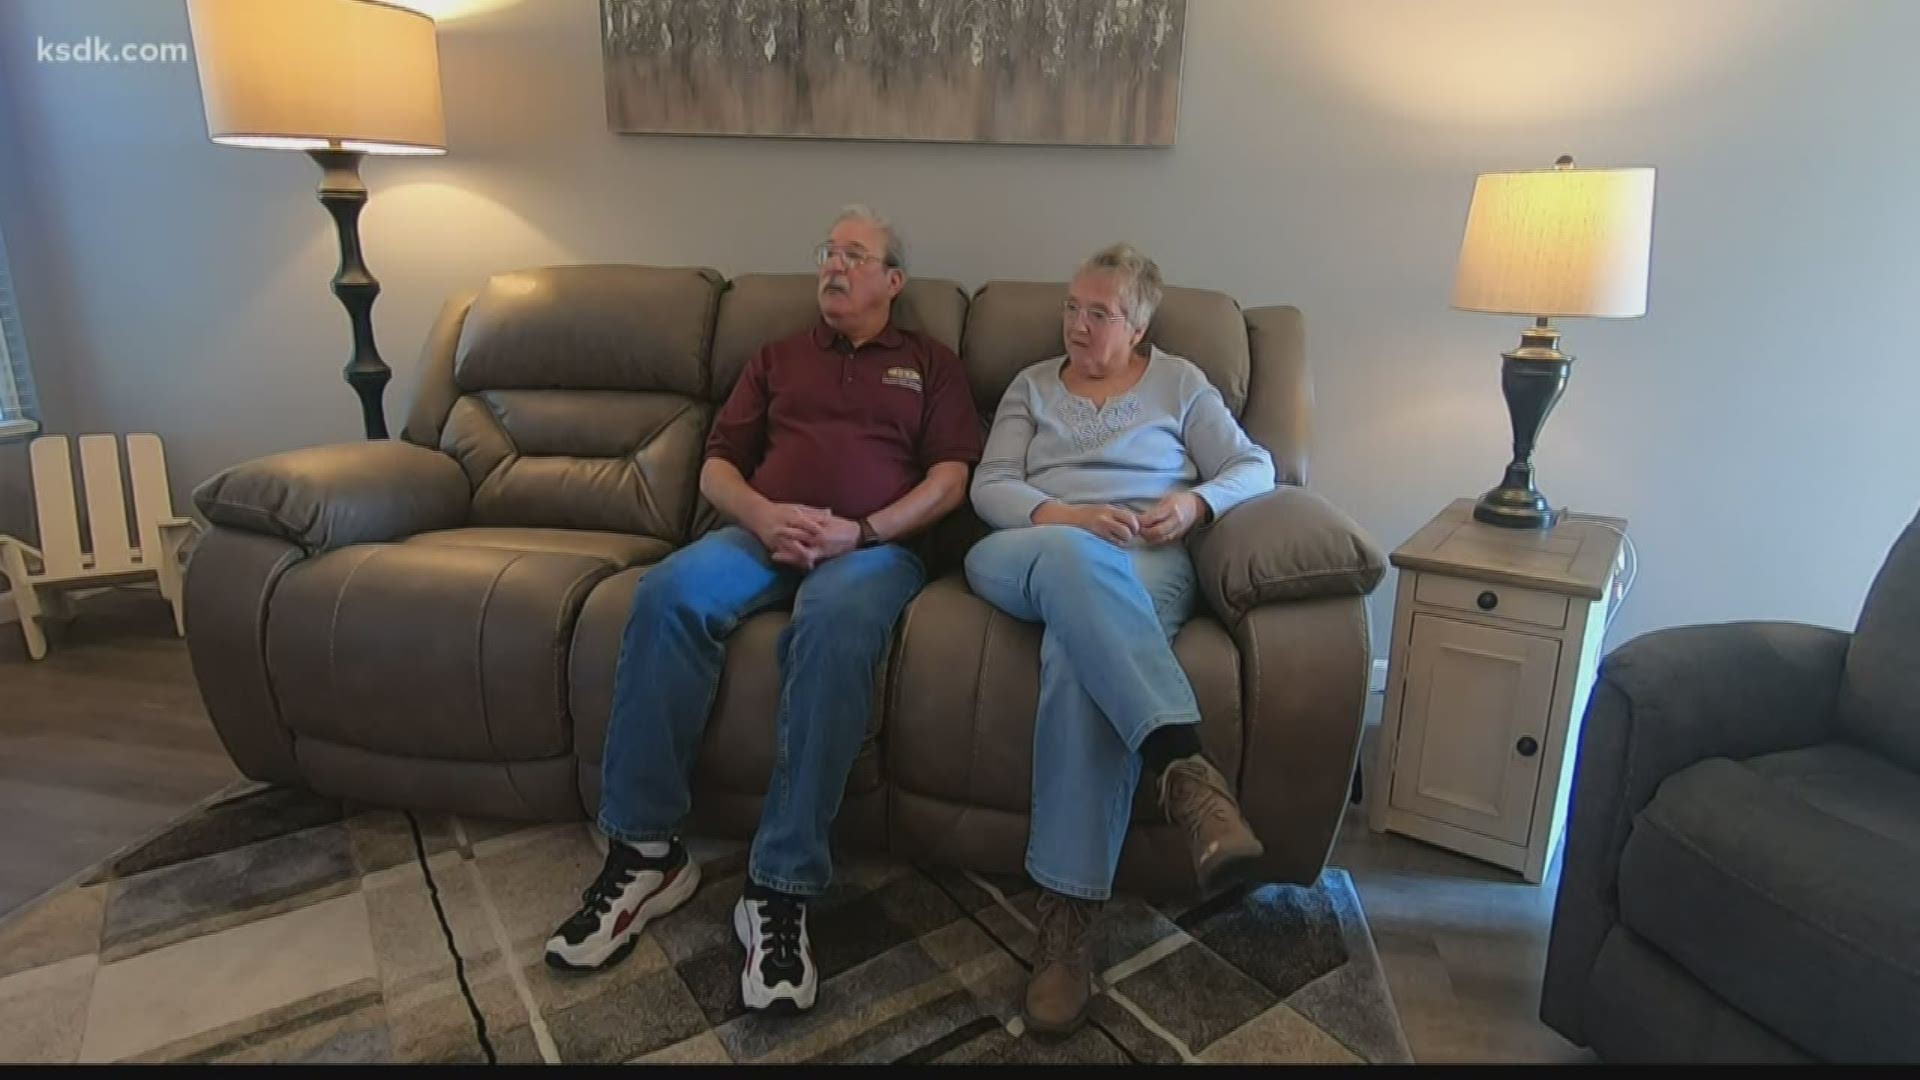 More people are canceling their vacation plans because of the coronavirus, including one couple in St. Charles.